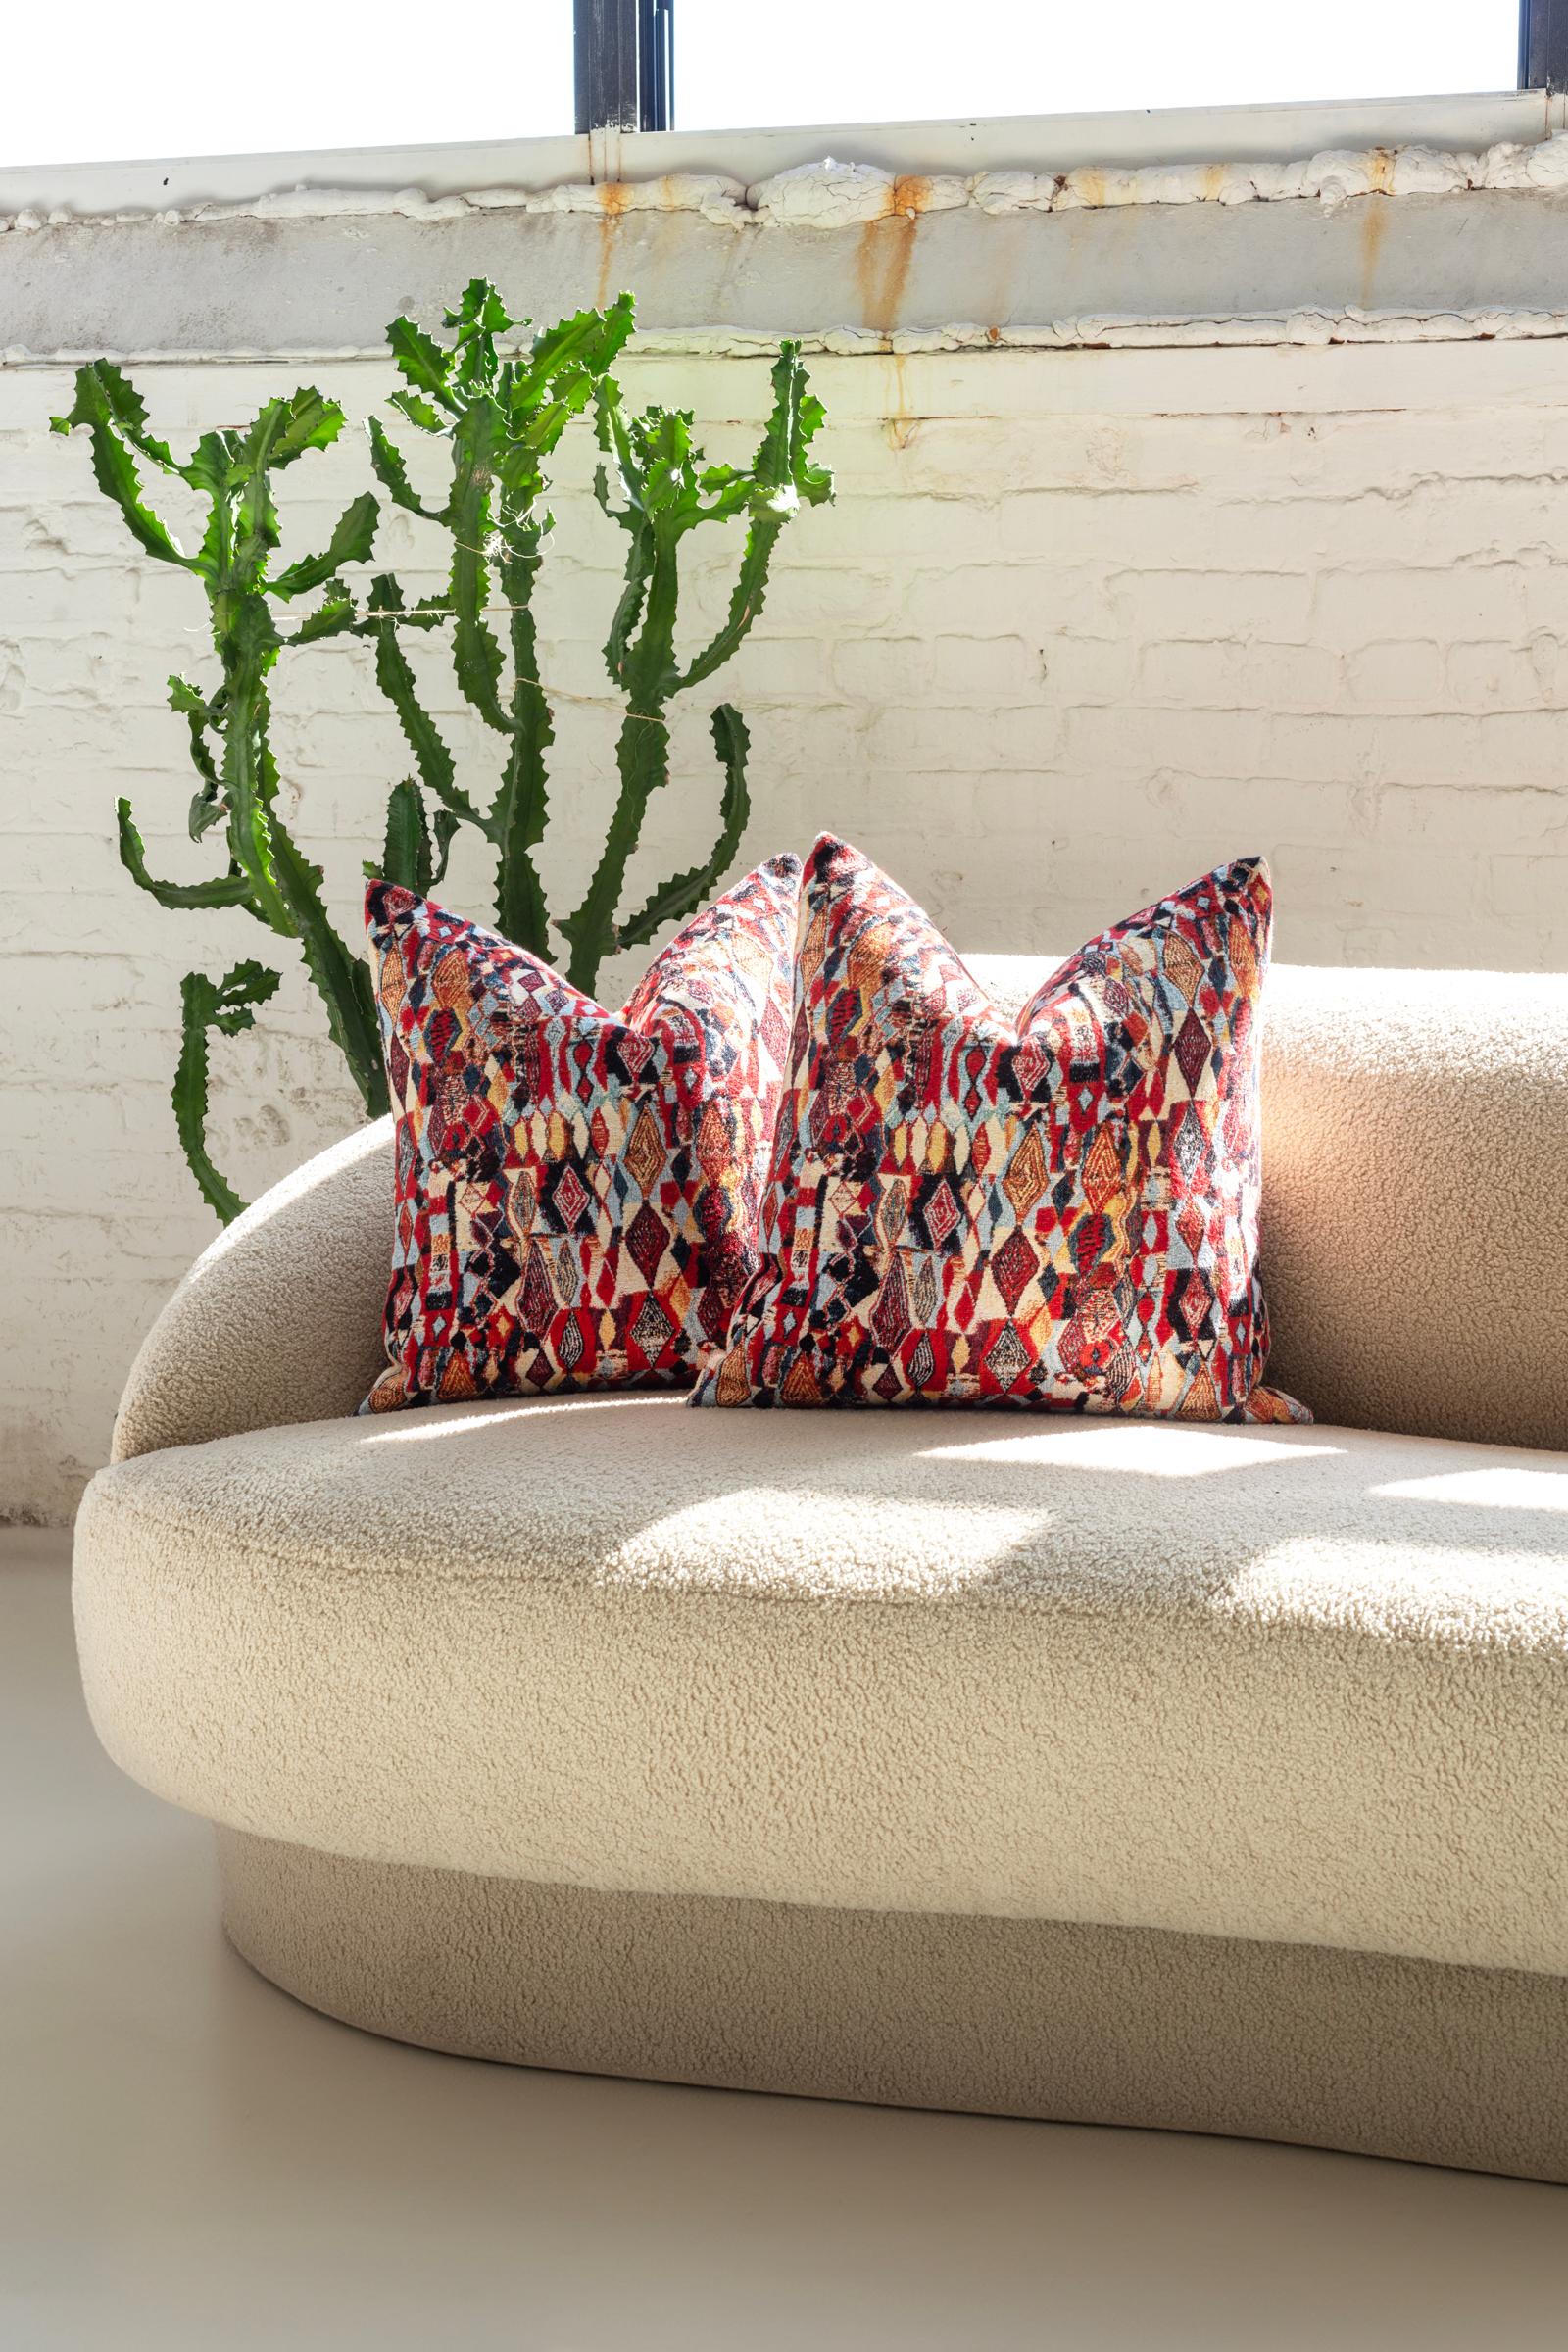 Crafted with unmatched skill in Chicago, these throw pillows embody luxury and artisanal beauty. Inside, the plush down filling provides supreme comfort, making them the perfect companions for relaxation. The exterior is where they truly